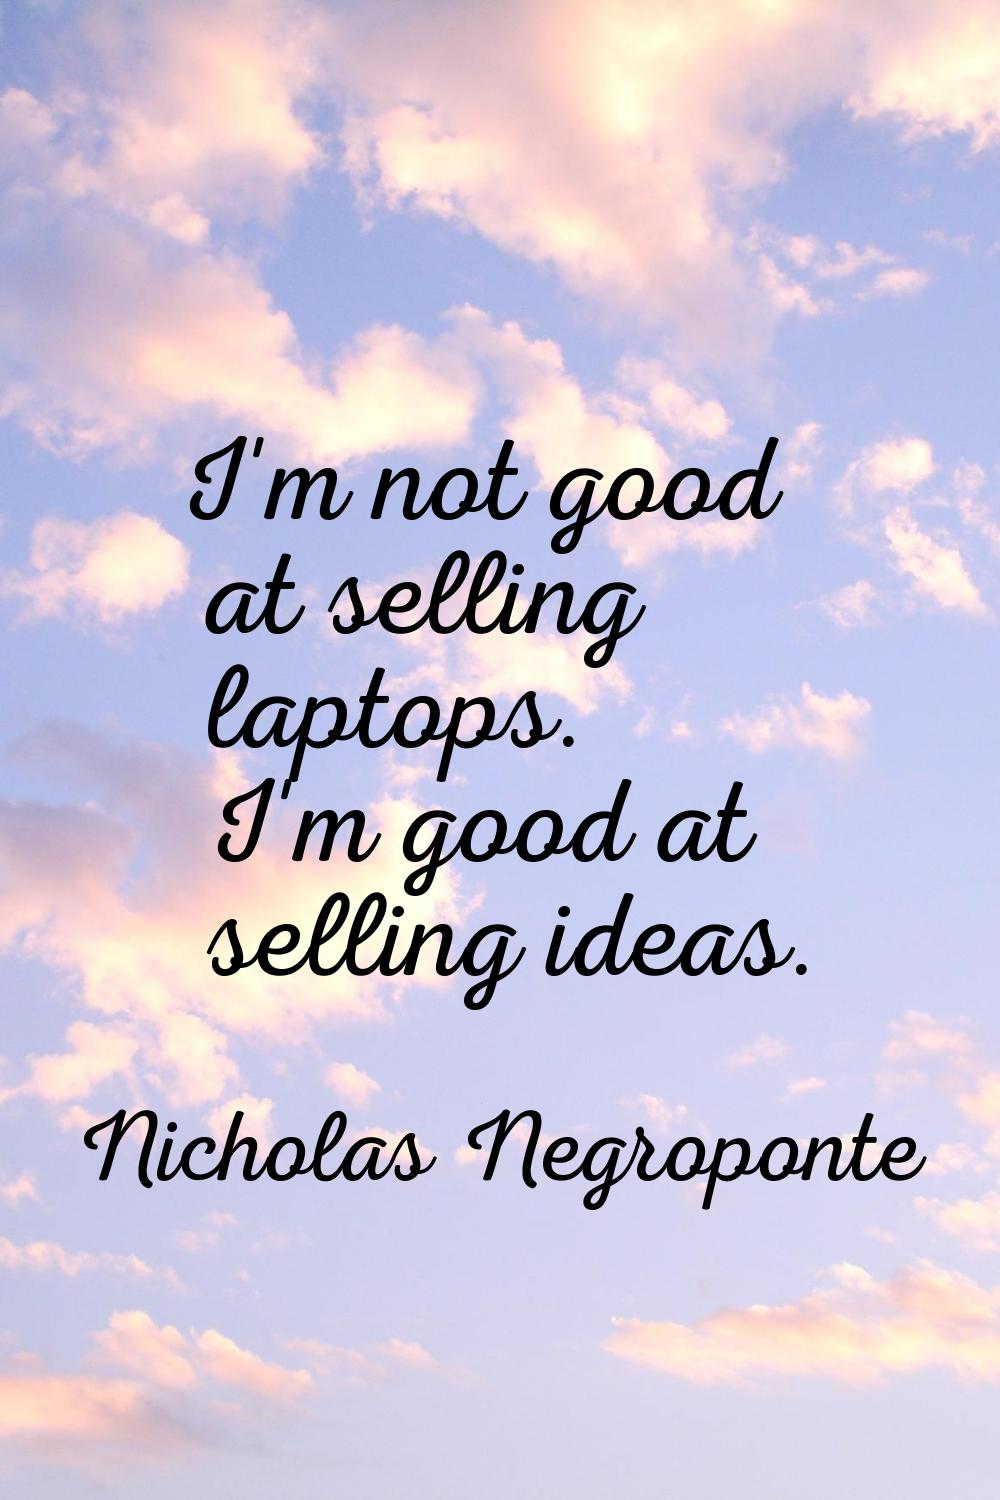 I'm not good at selling laptops. I'm good at selling ideas.